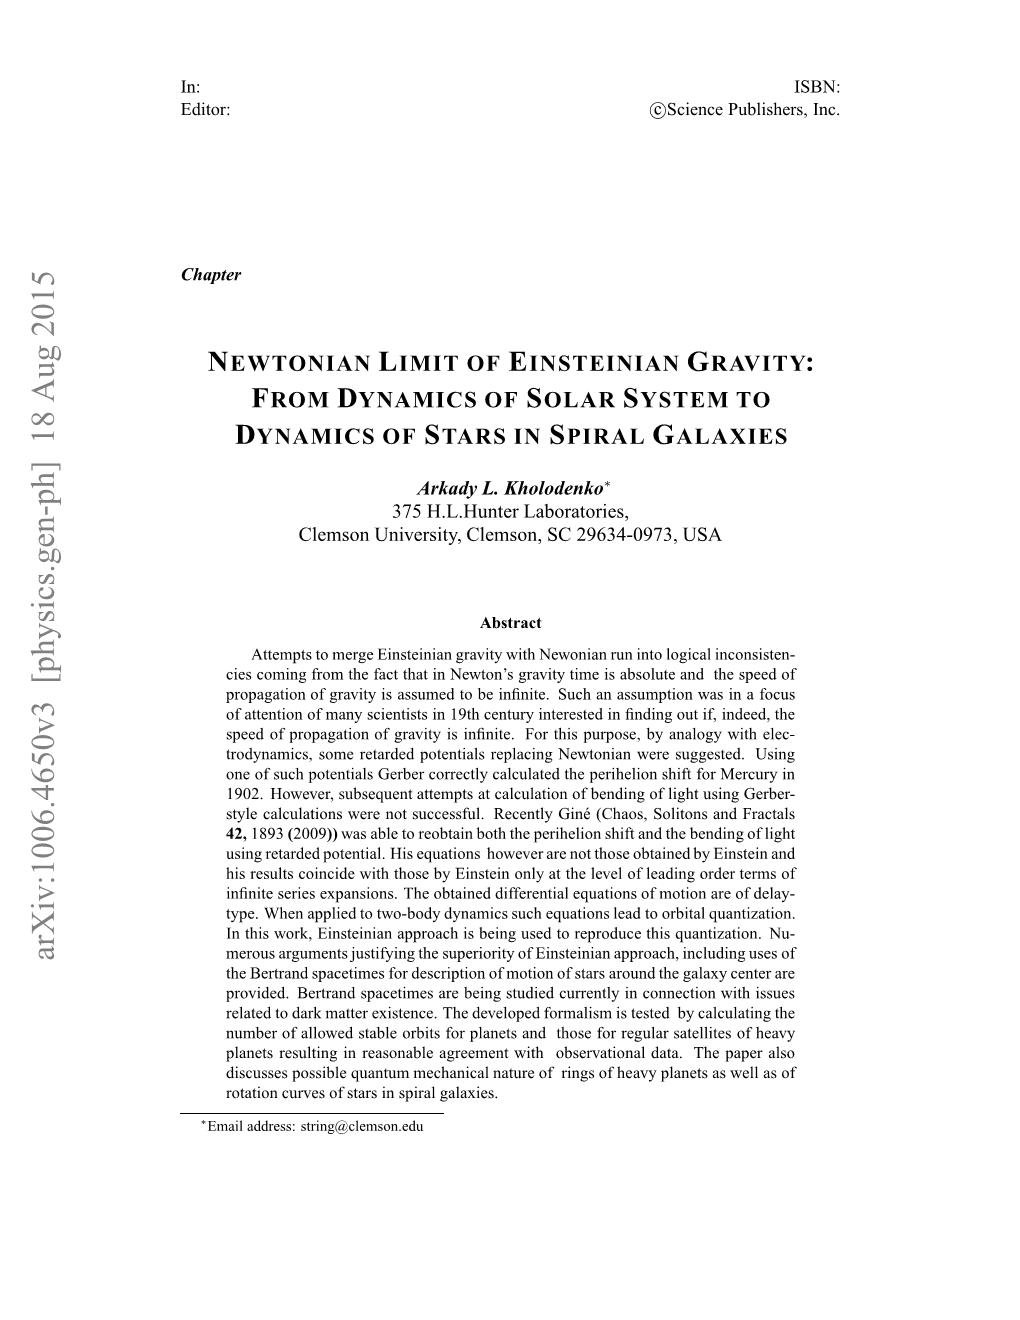 Newtonian Limit of Einsteinian Gravity: from Dynamics of Solar System To